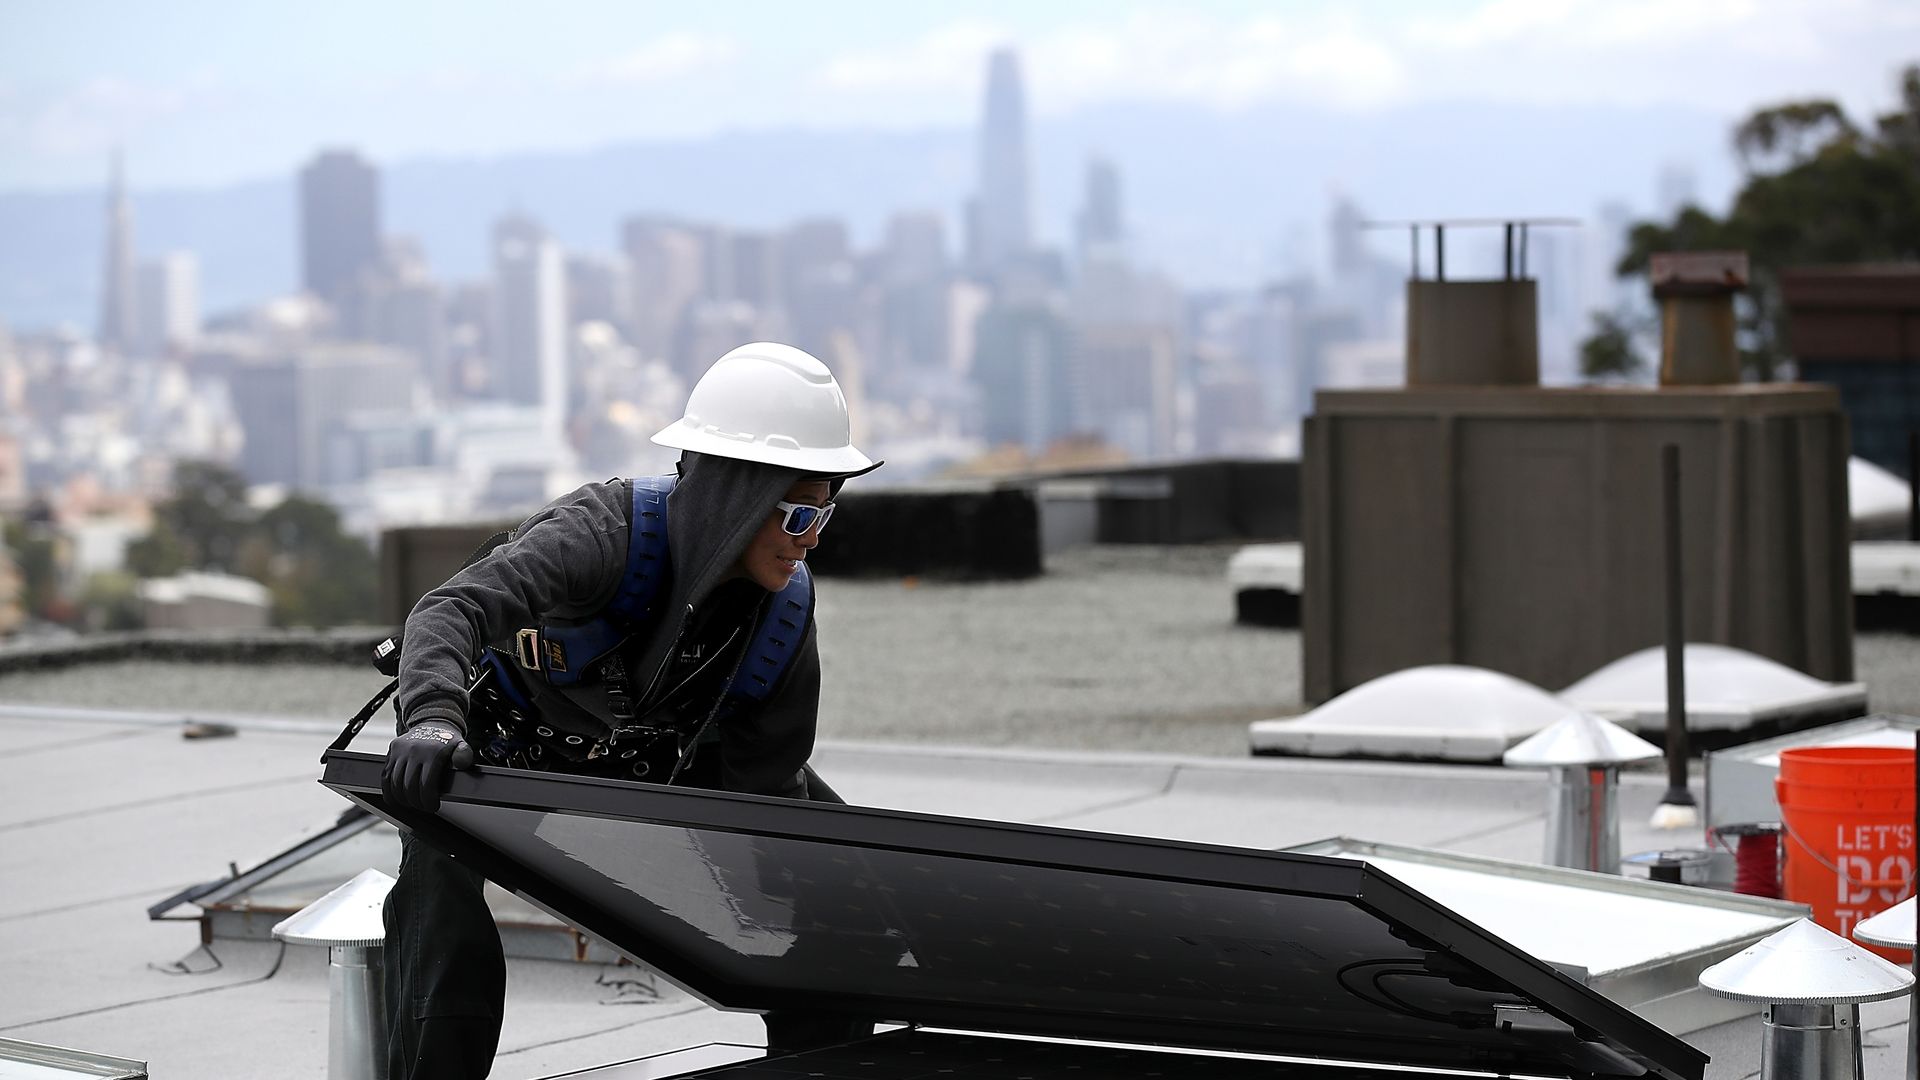 Luminalt solar installers Pam Quan moves a solar panel during an istallation on the roof of a home on May 9, 2018 in San Francisco, California.  